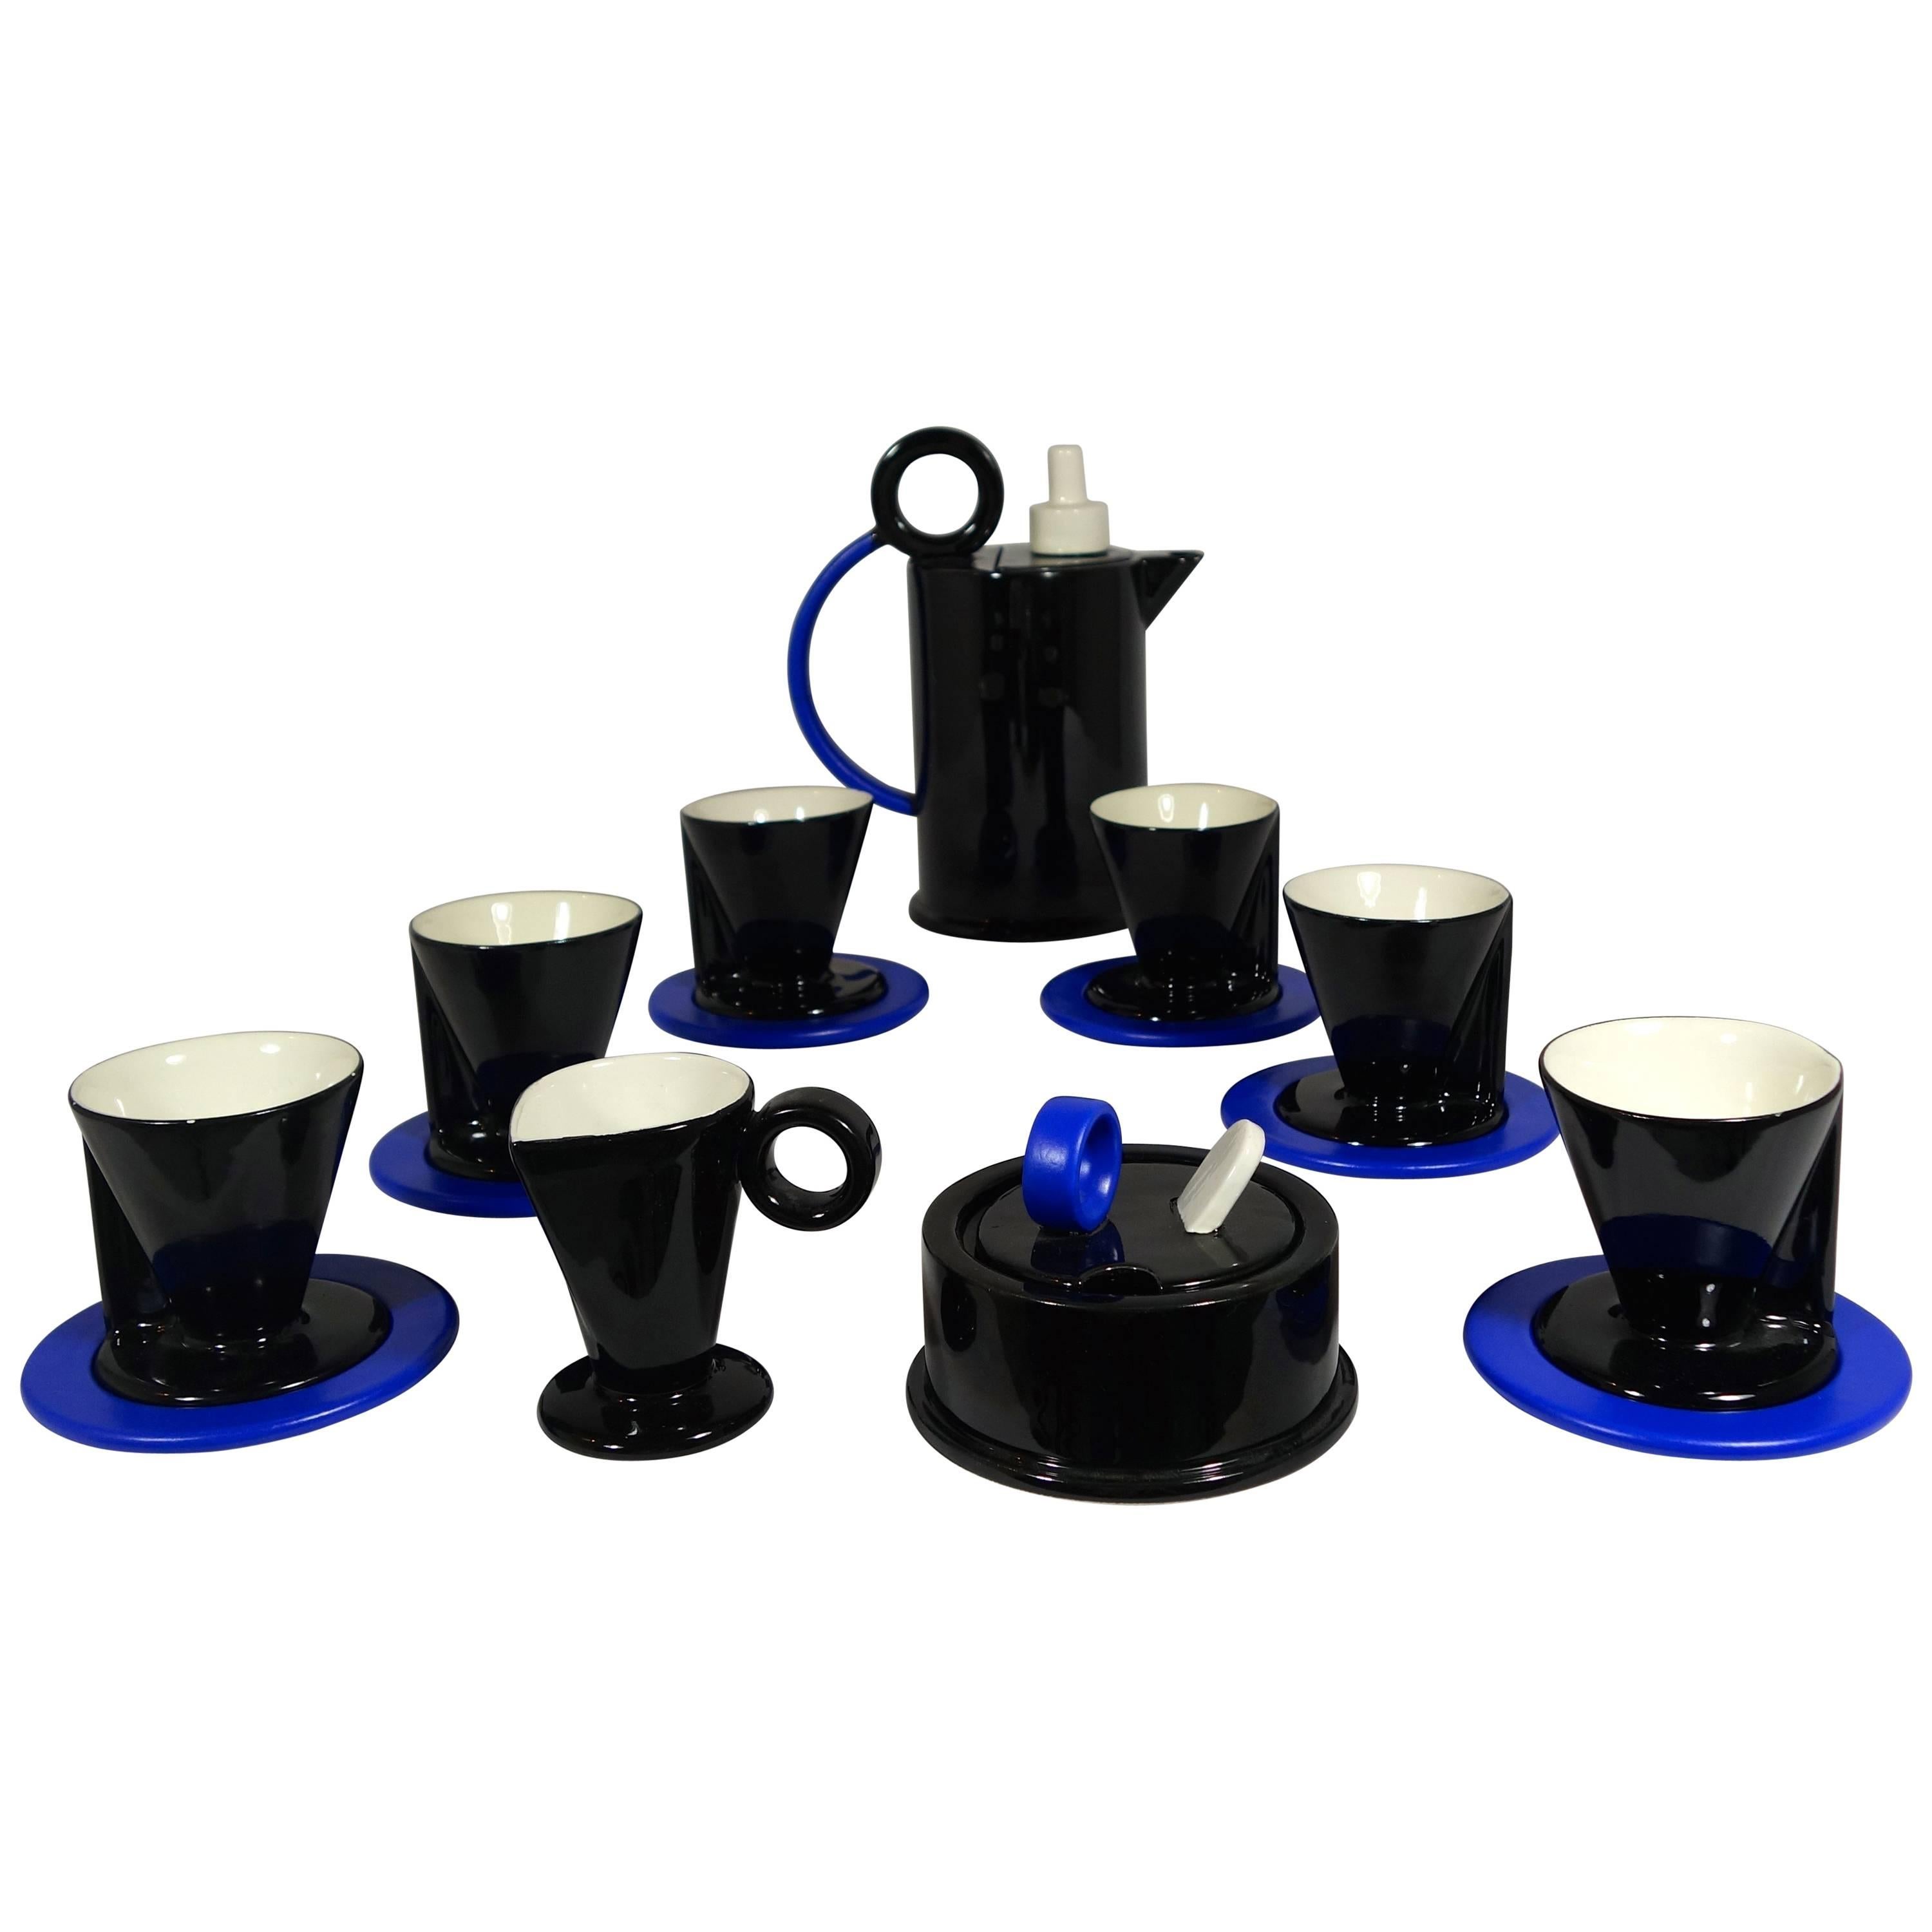 Memphis Coffee Set from the Hollywood Collection by Marco Zanini for Flavia